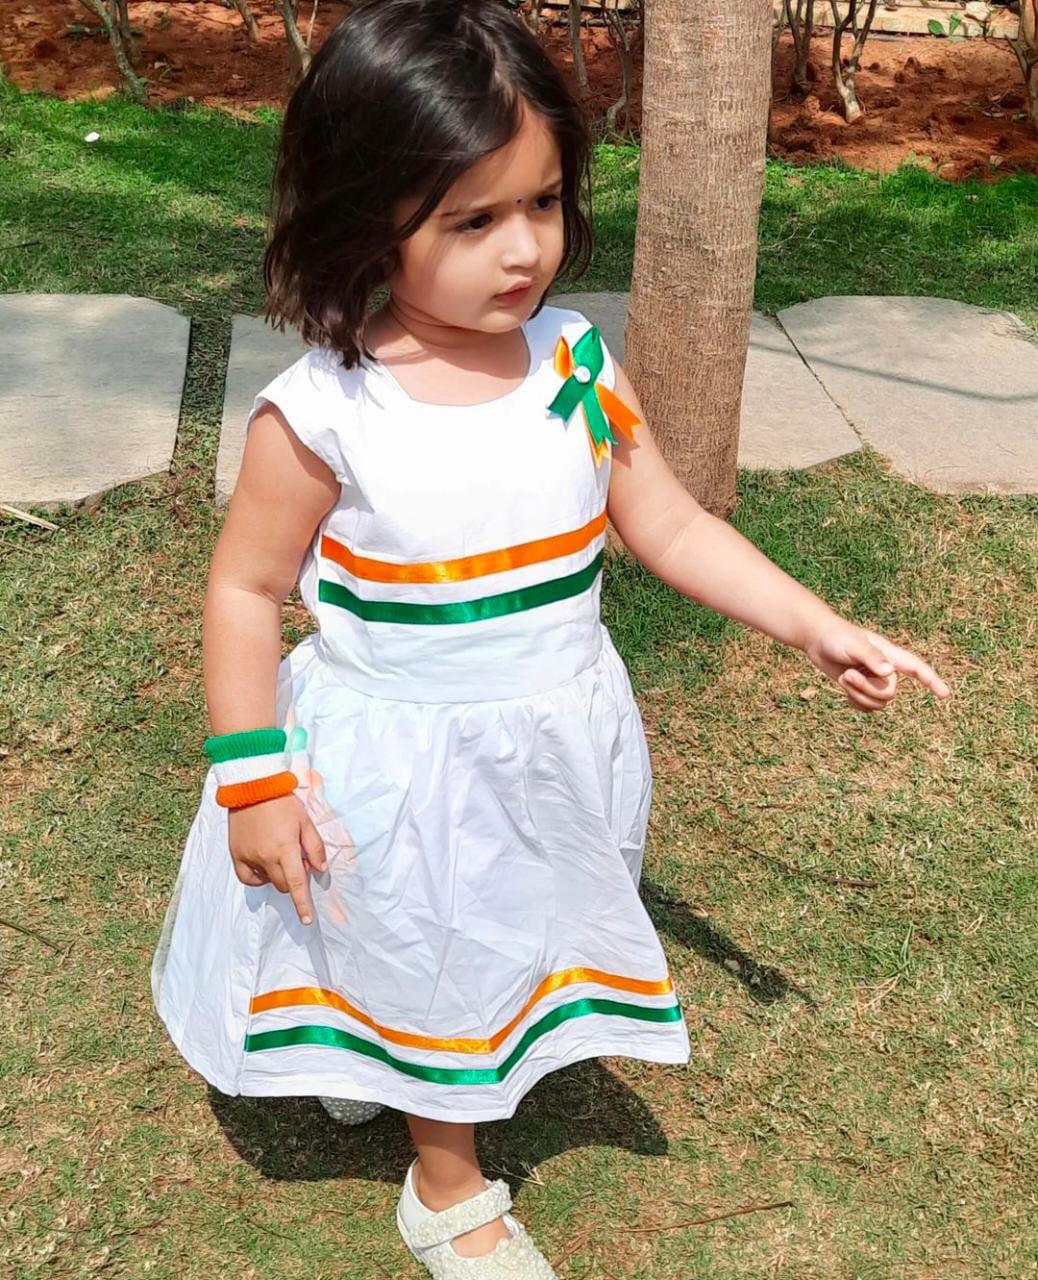 Dress up in Tri-Colours on 15th August Independence Day | Indian women  fashion, 15 august independence day, August outfits